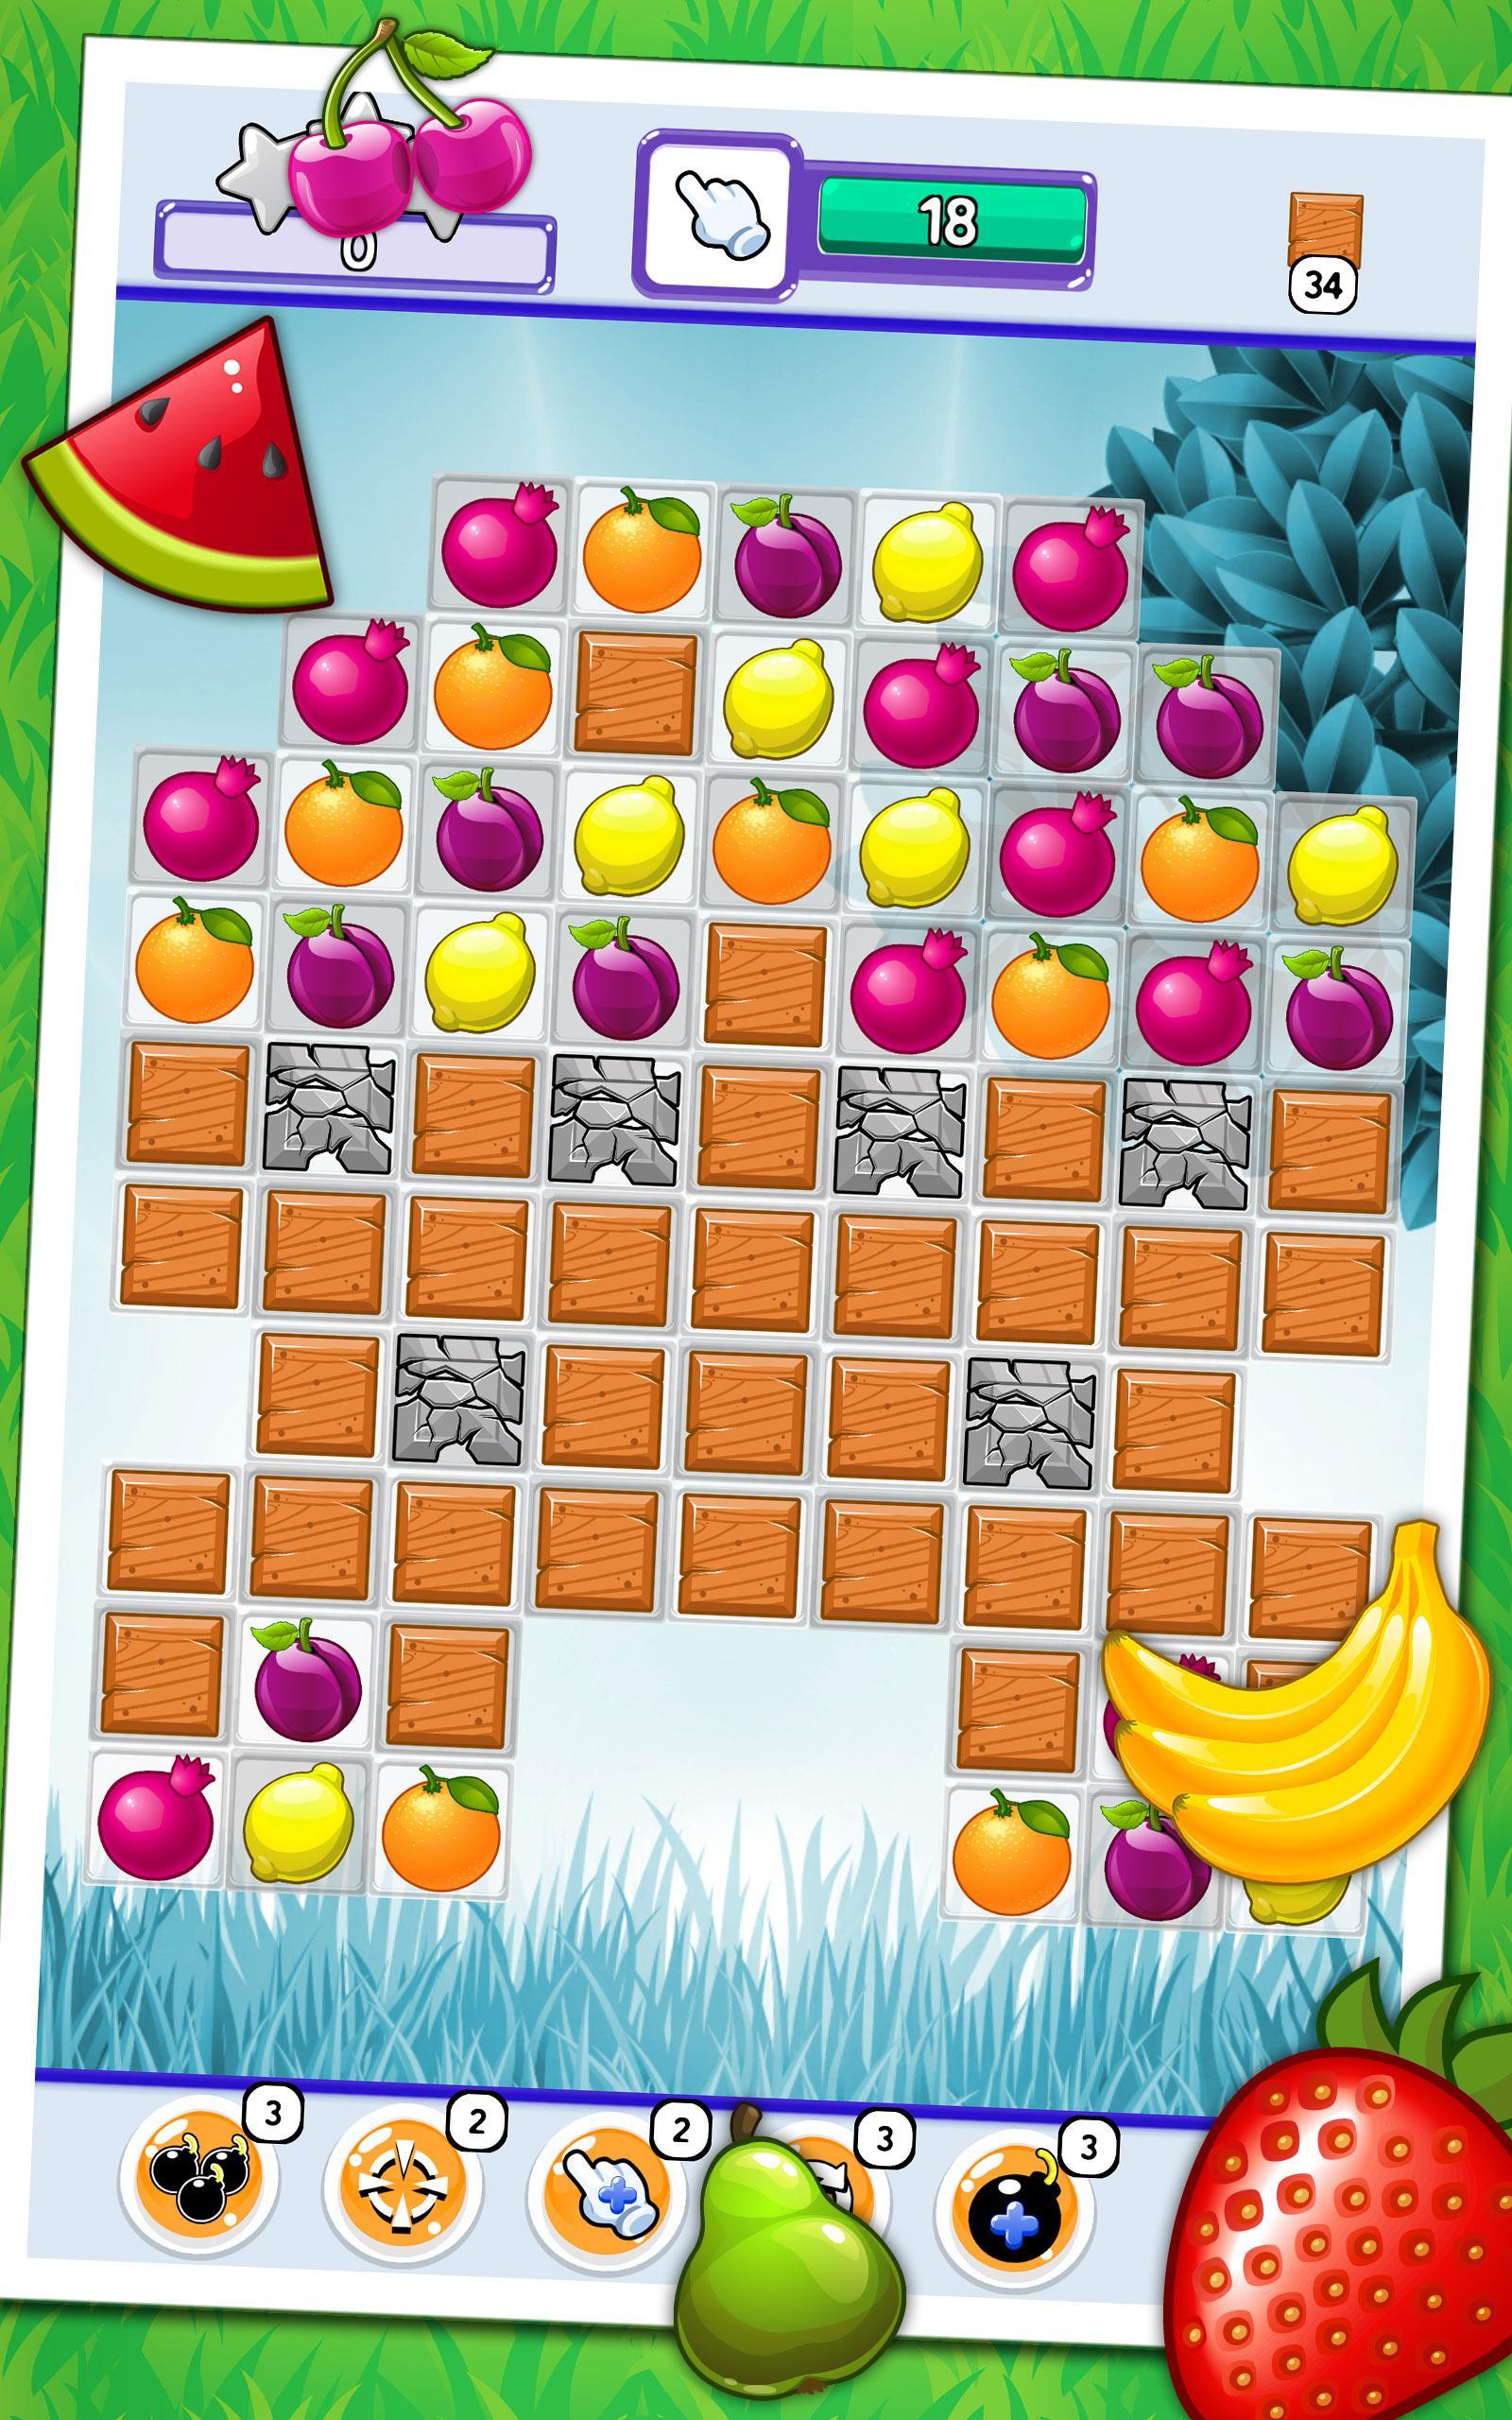 Fruits party don t vote on twitter. Fruit Party слот. Fruit Paradise Match 3 игры. Игра Fruit Factory. Слот Fruit Party фото.